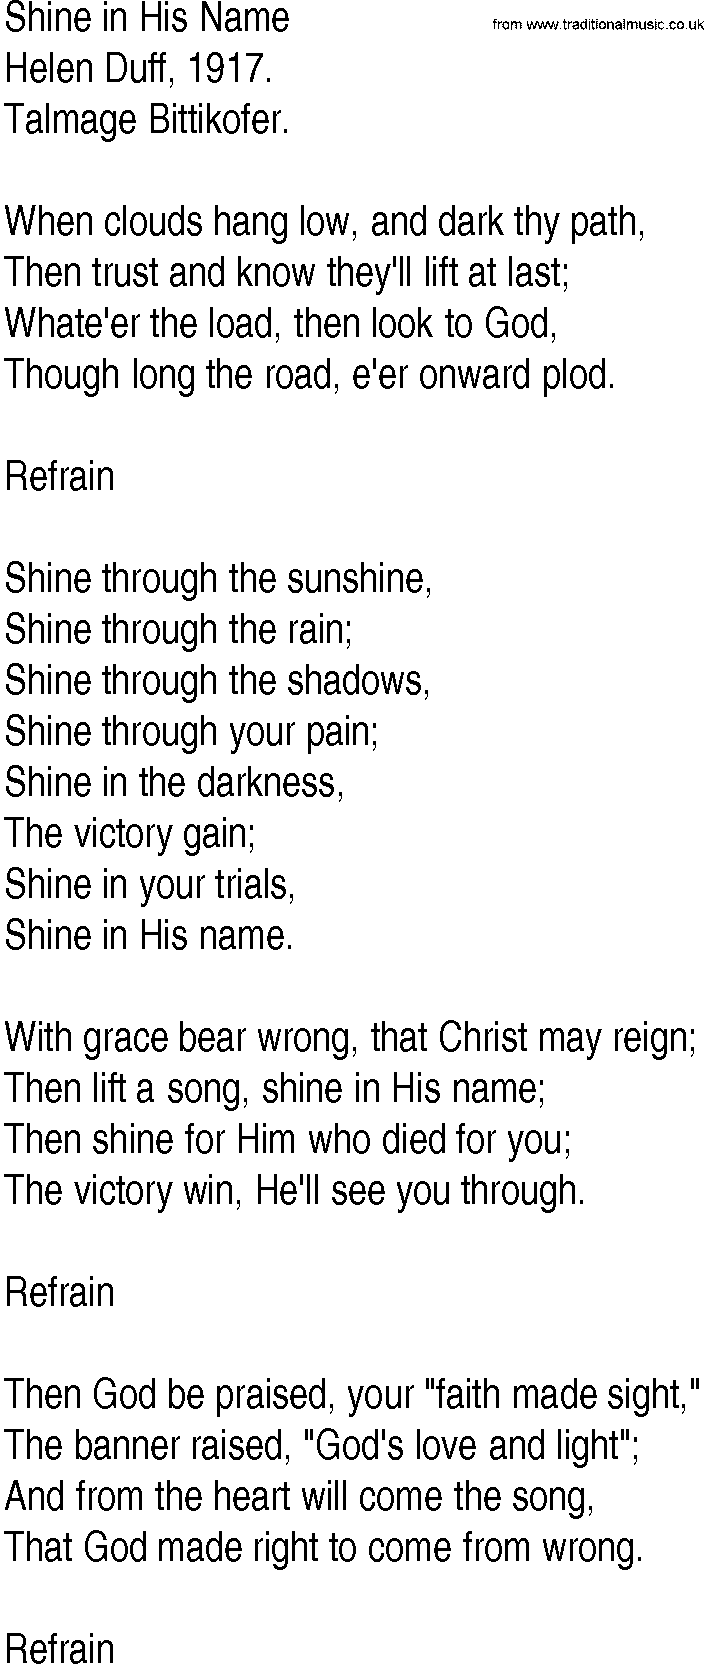 Hymn and Gospel Song: Shine in His Name by Helen Duff lyrics